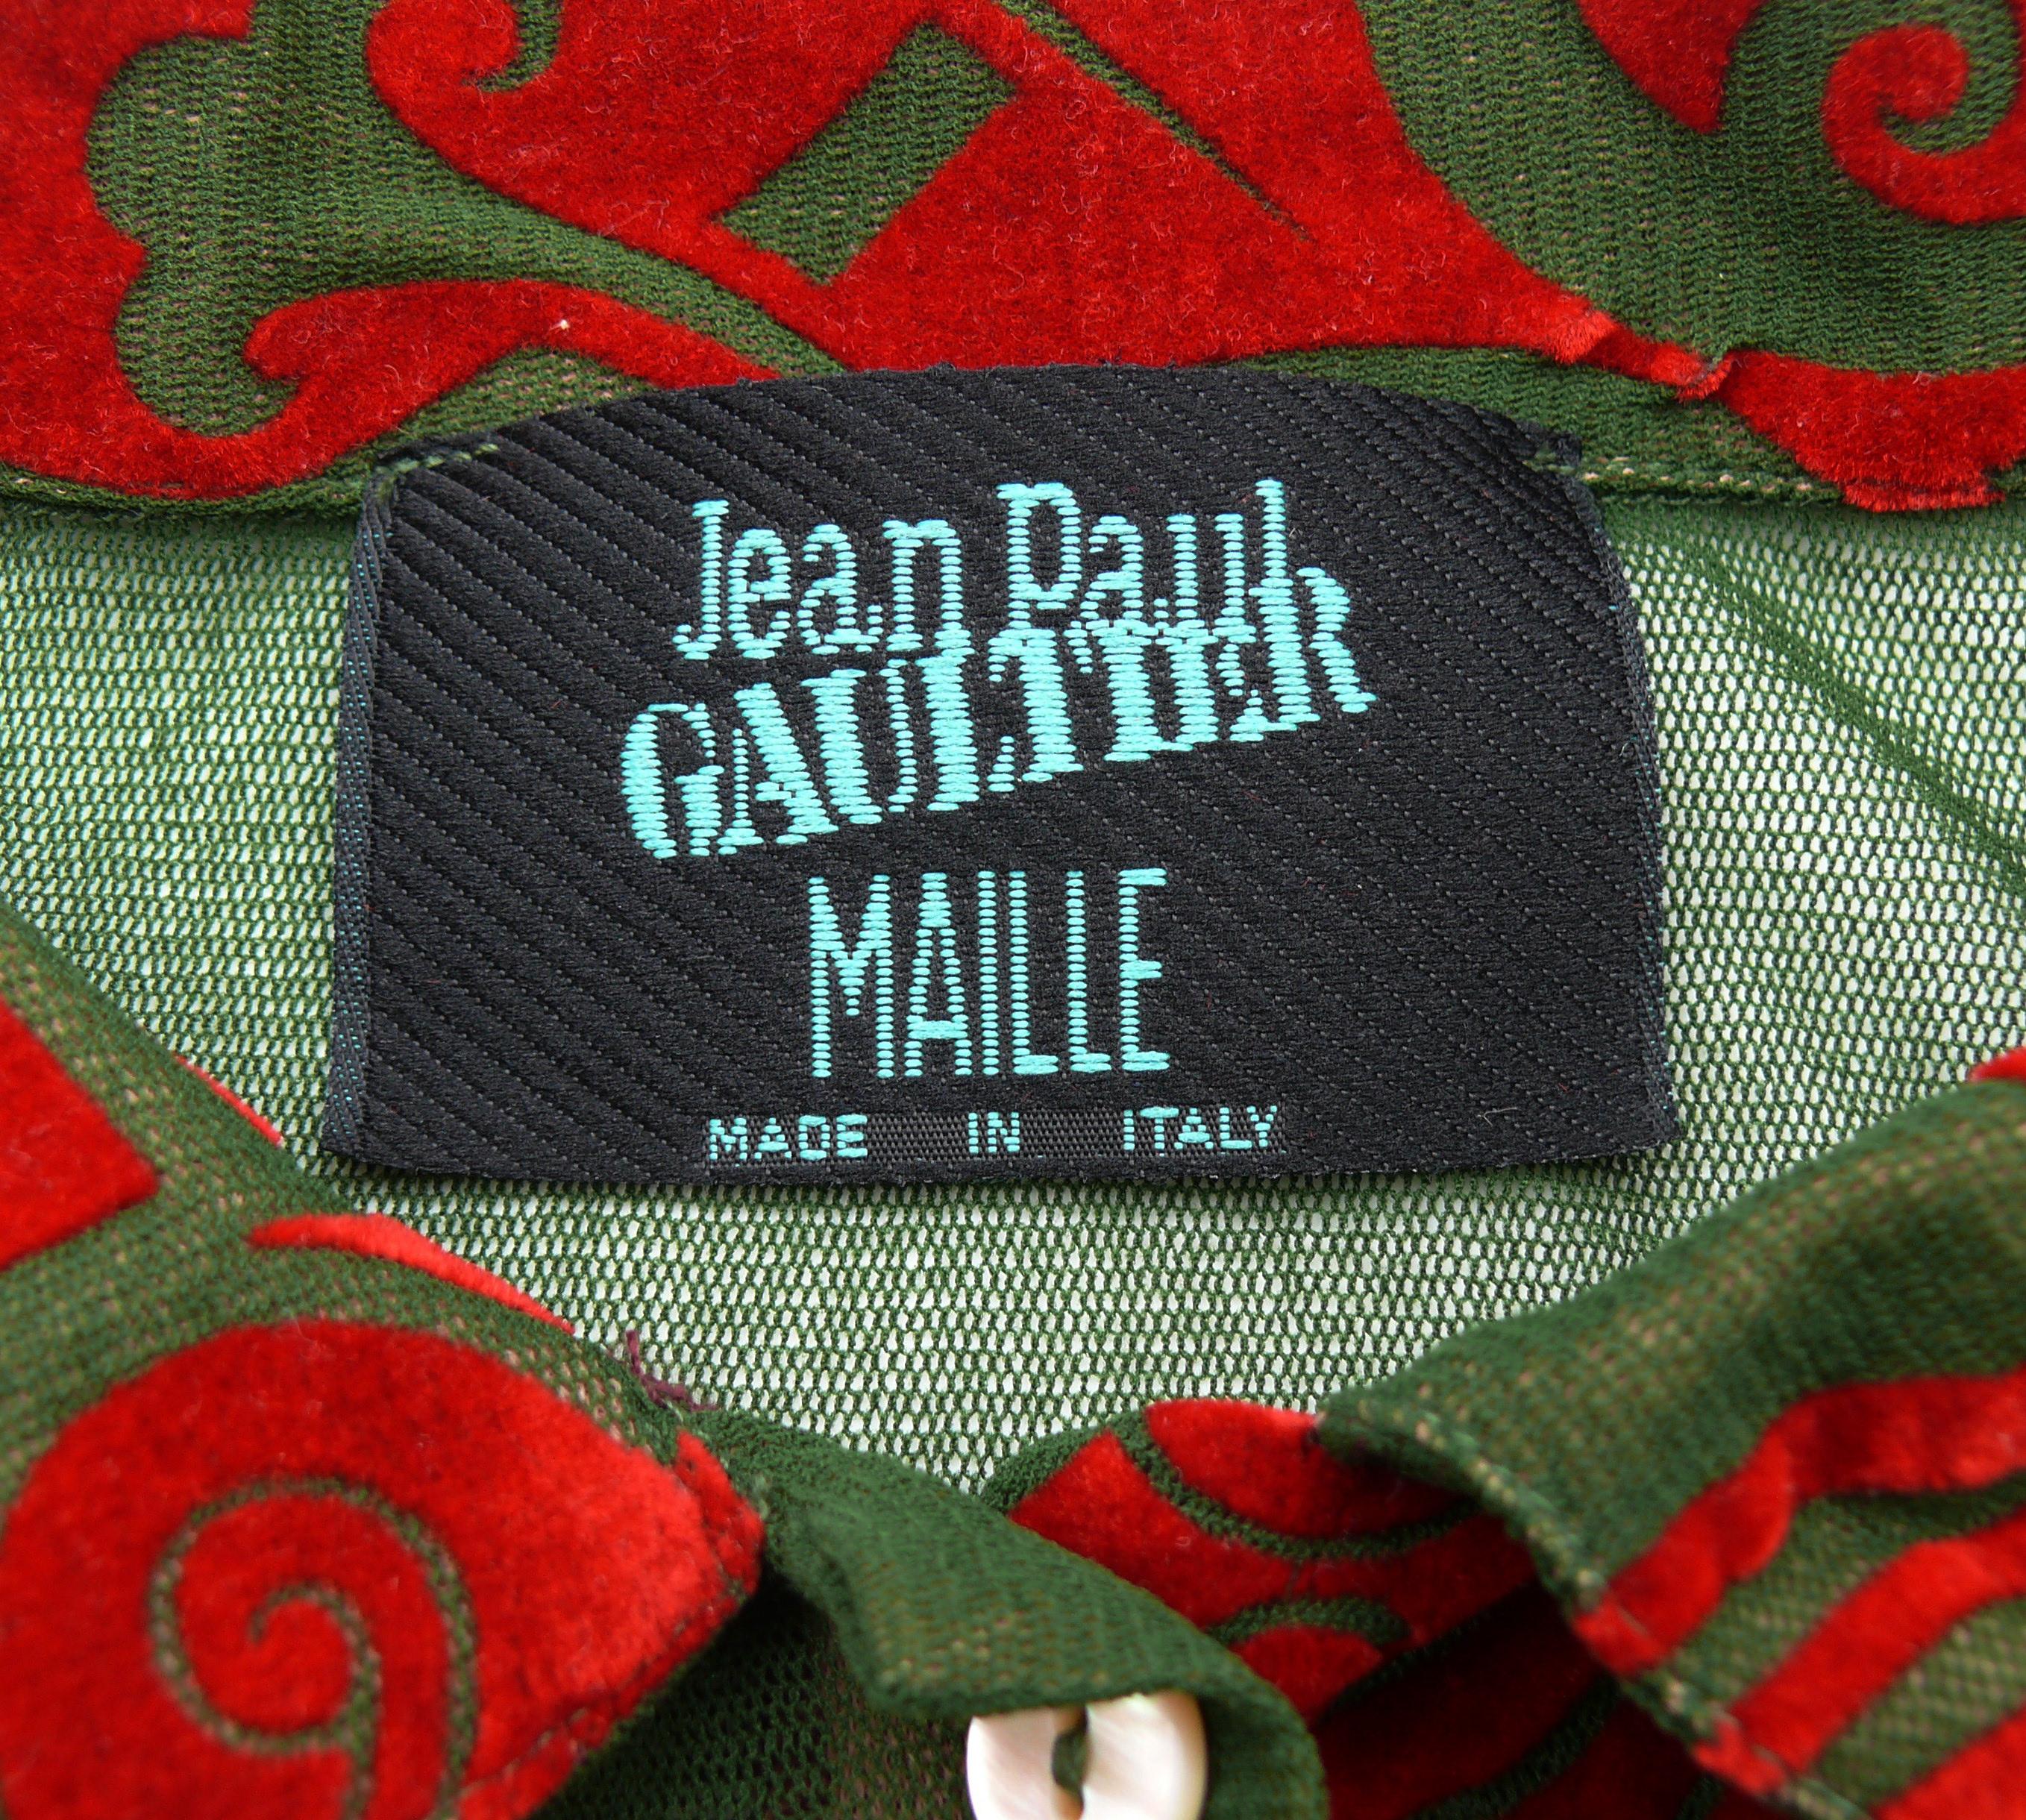 JEAN PAUL GAULTIER Vintage 1996 Iconic Green/Red Tribal Tattoo Mesh Shirt Size L For Sale 4